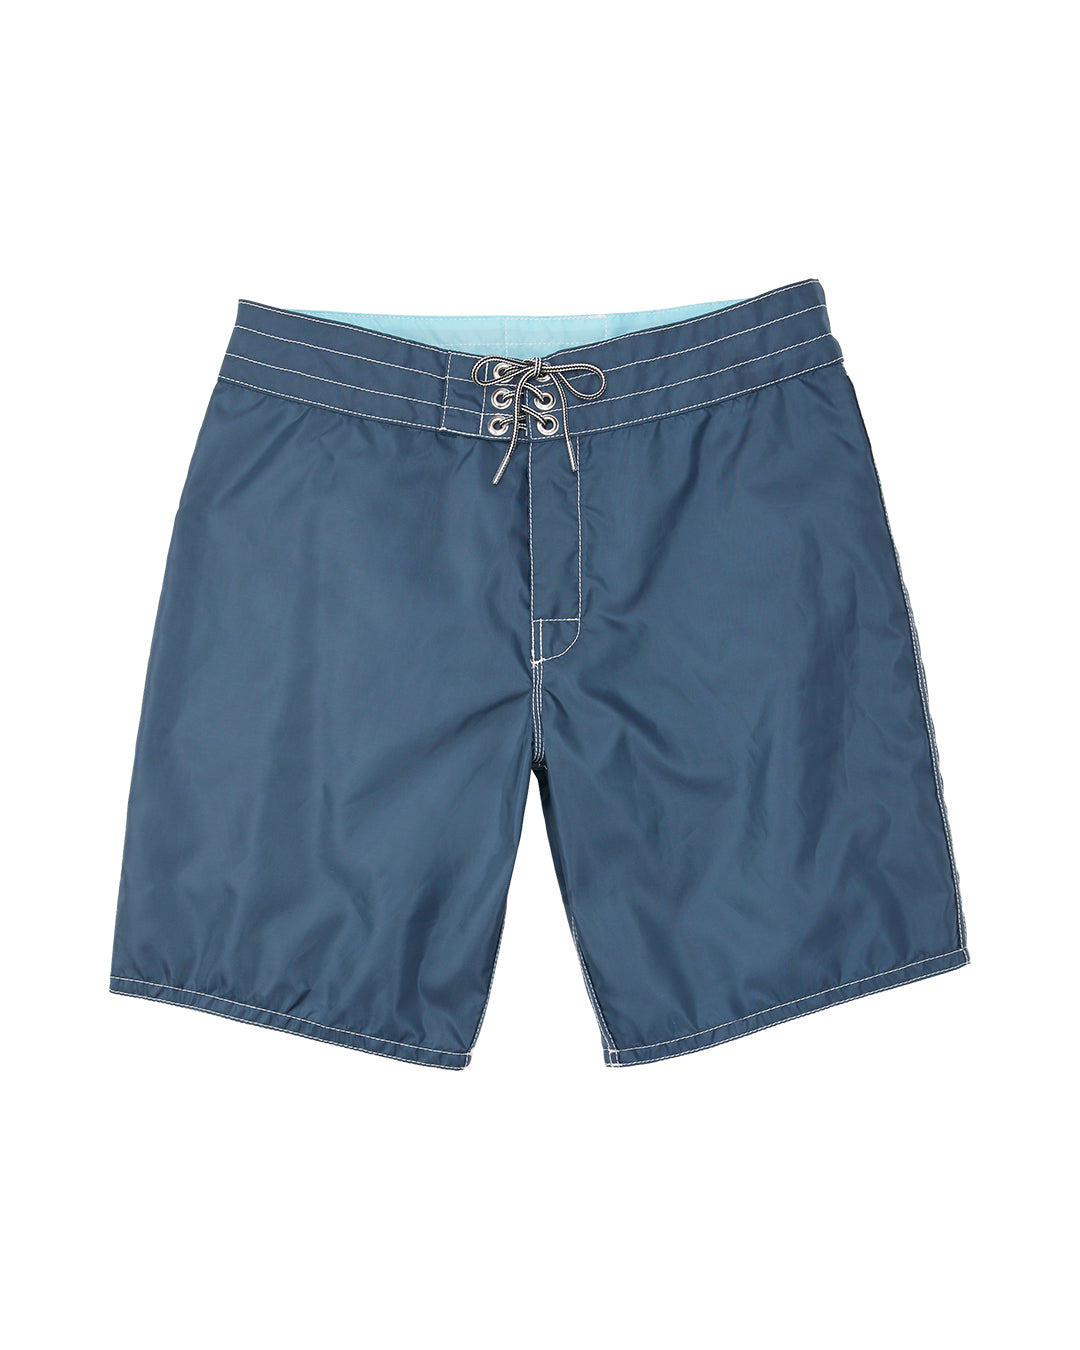 JUST KIDS - Johnny Cotton Boxers are the perfect every day